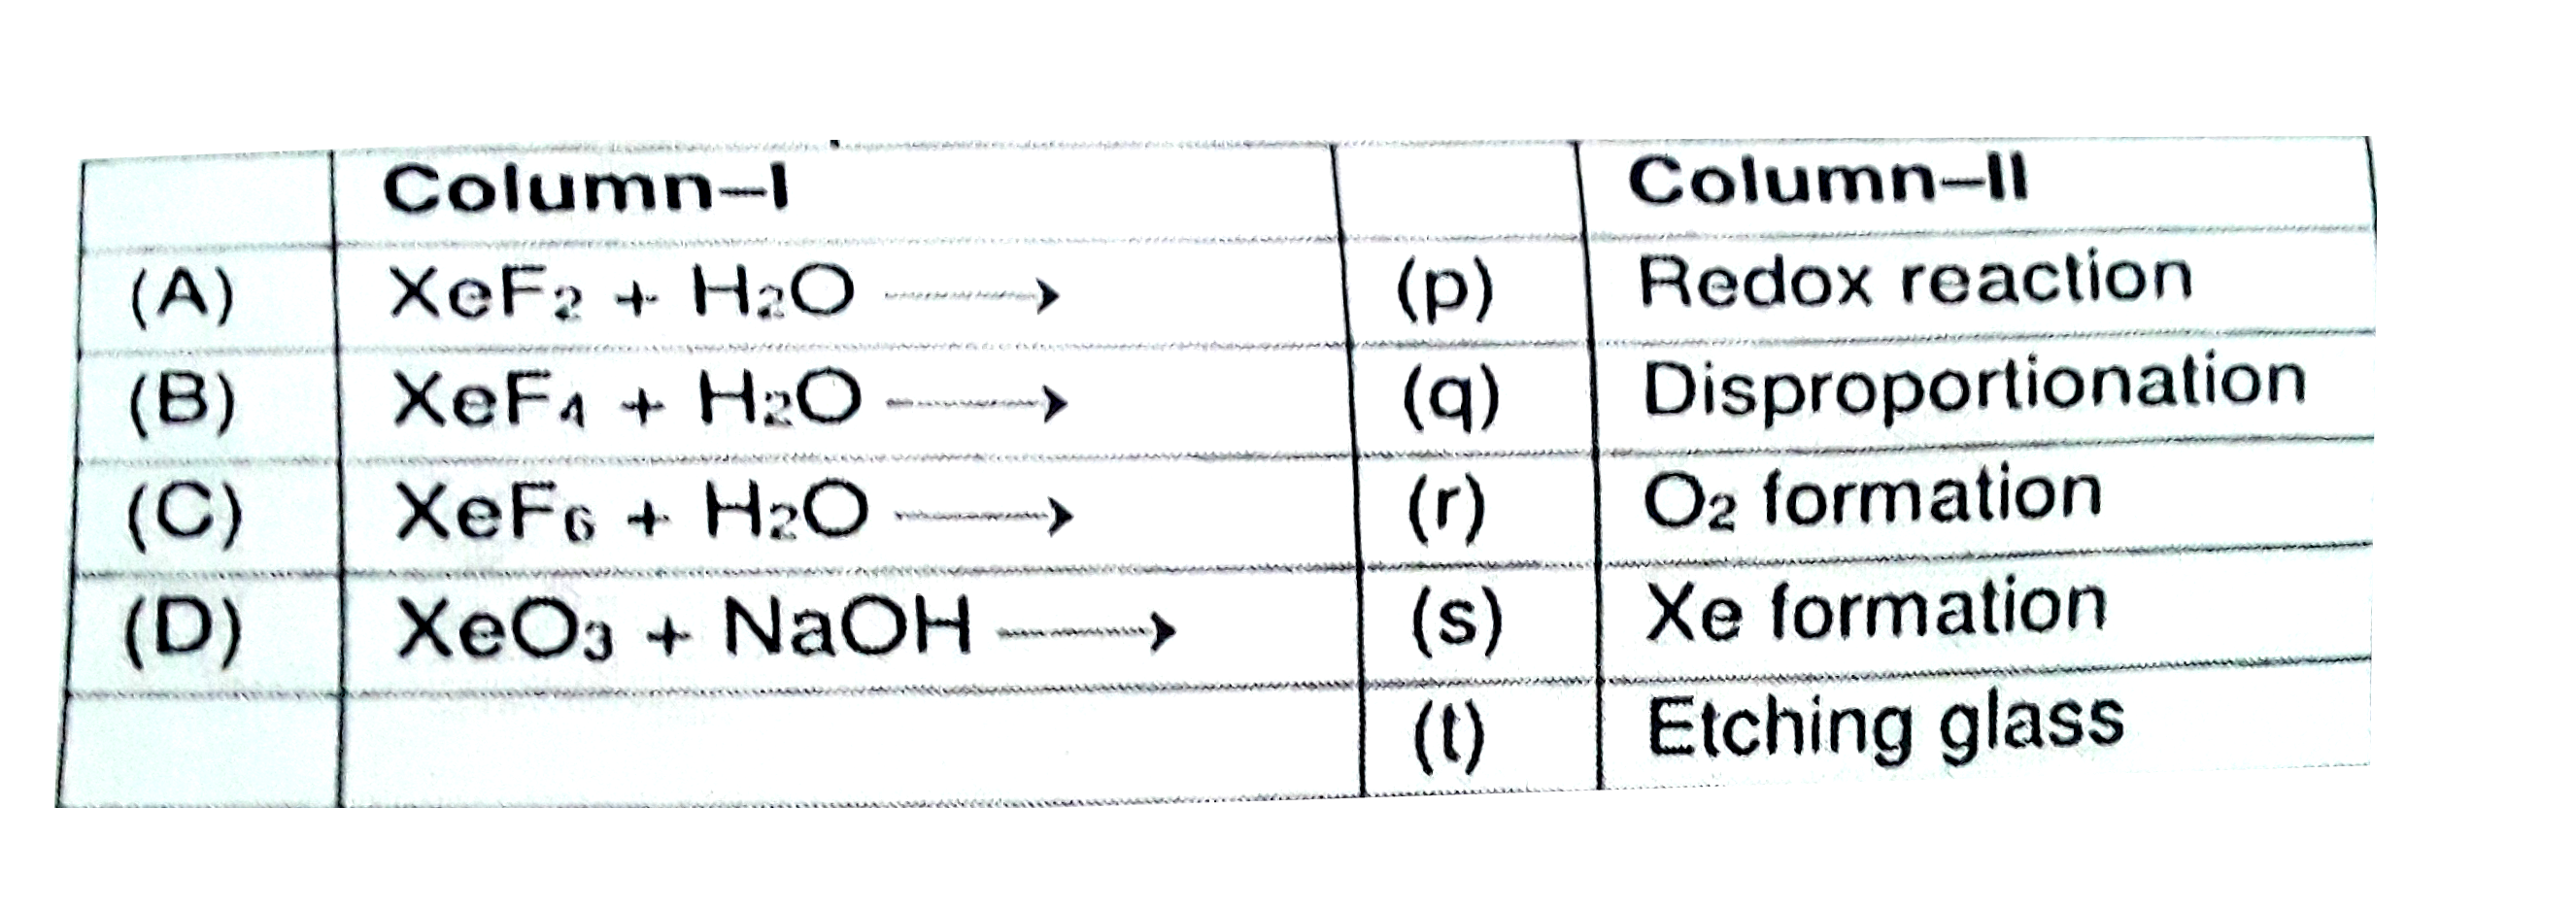 Match the reaction products listed in column-I with the particulars listed in column-II